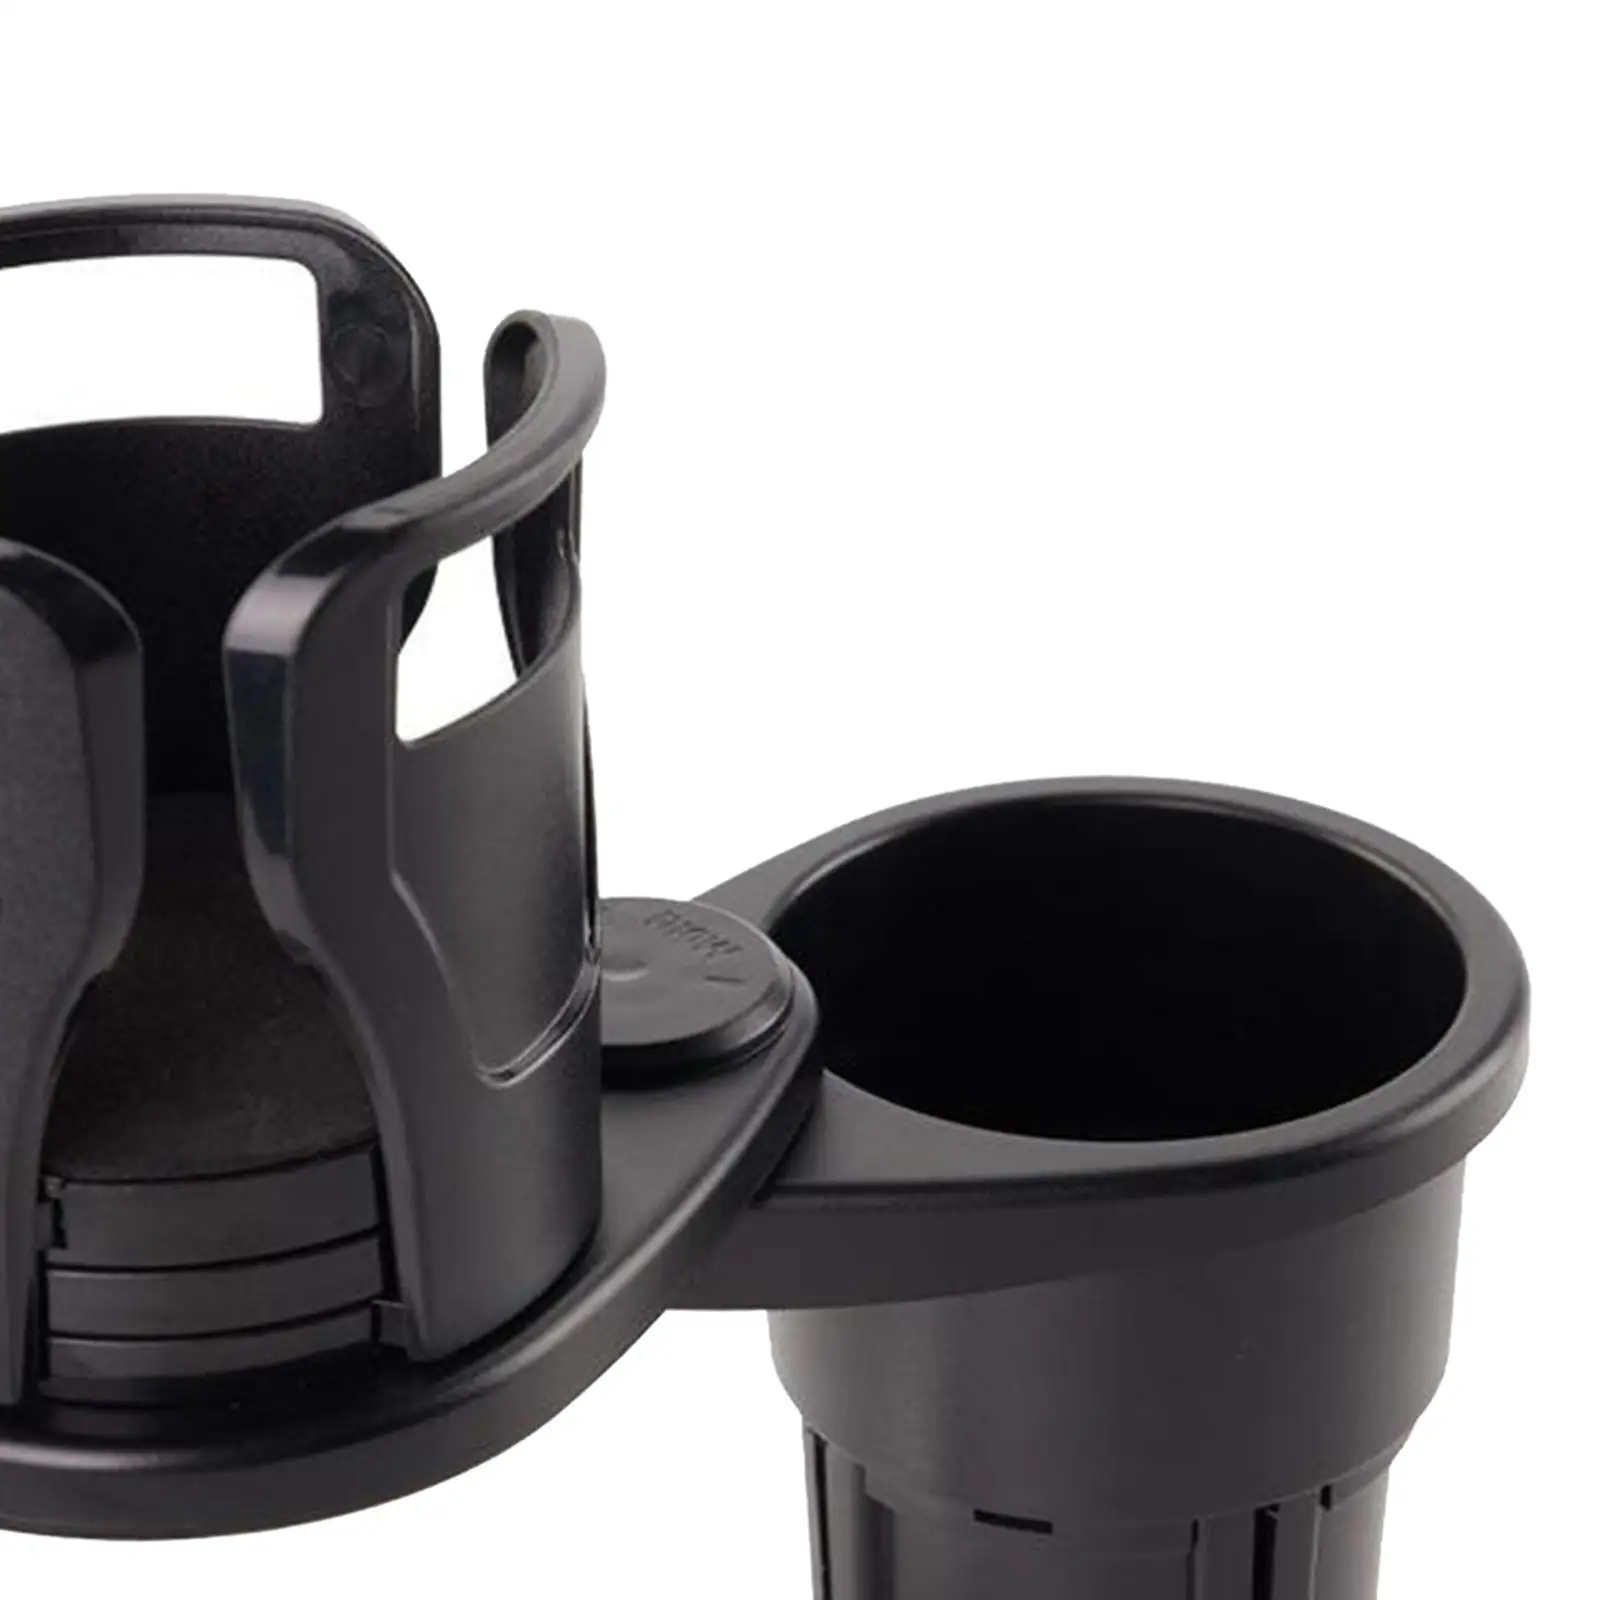 2x Car Cup Holder Expander  Cups 60°Rotating Multifunctional Water Cup Universal Drink  Bottle